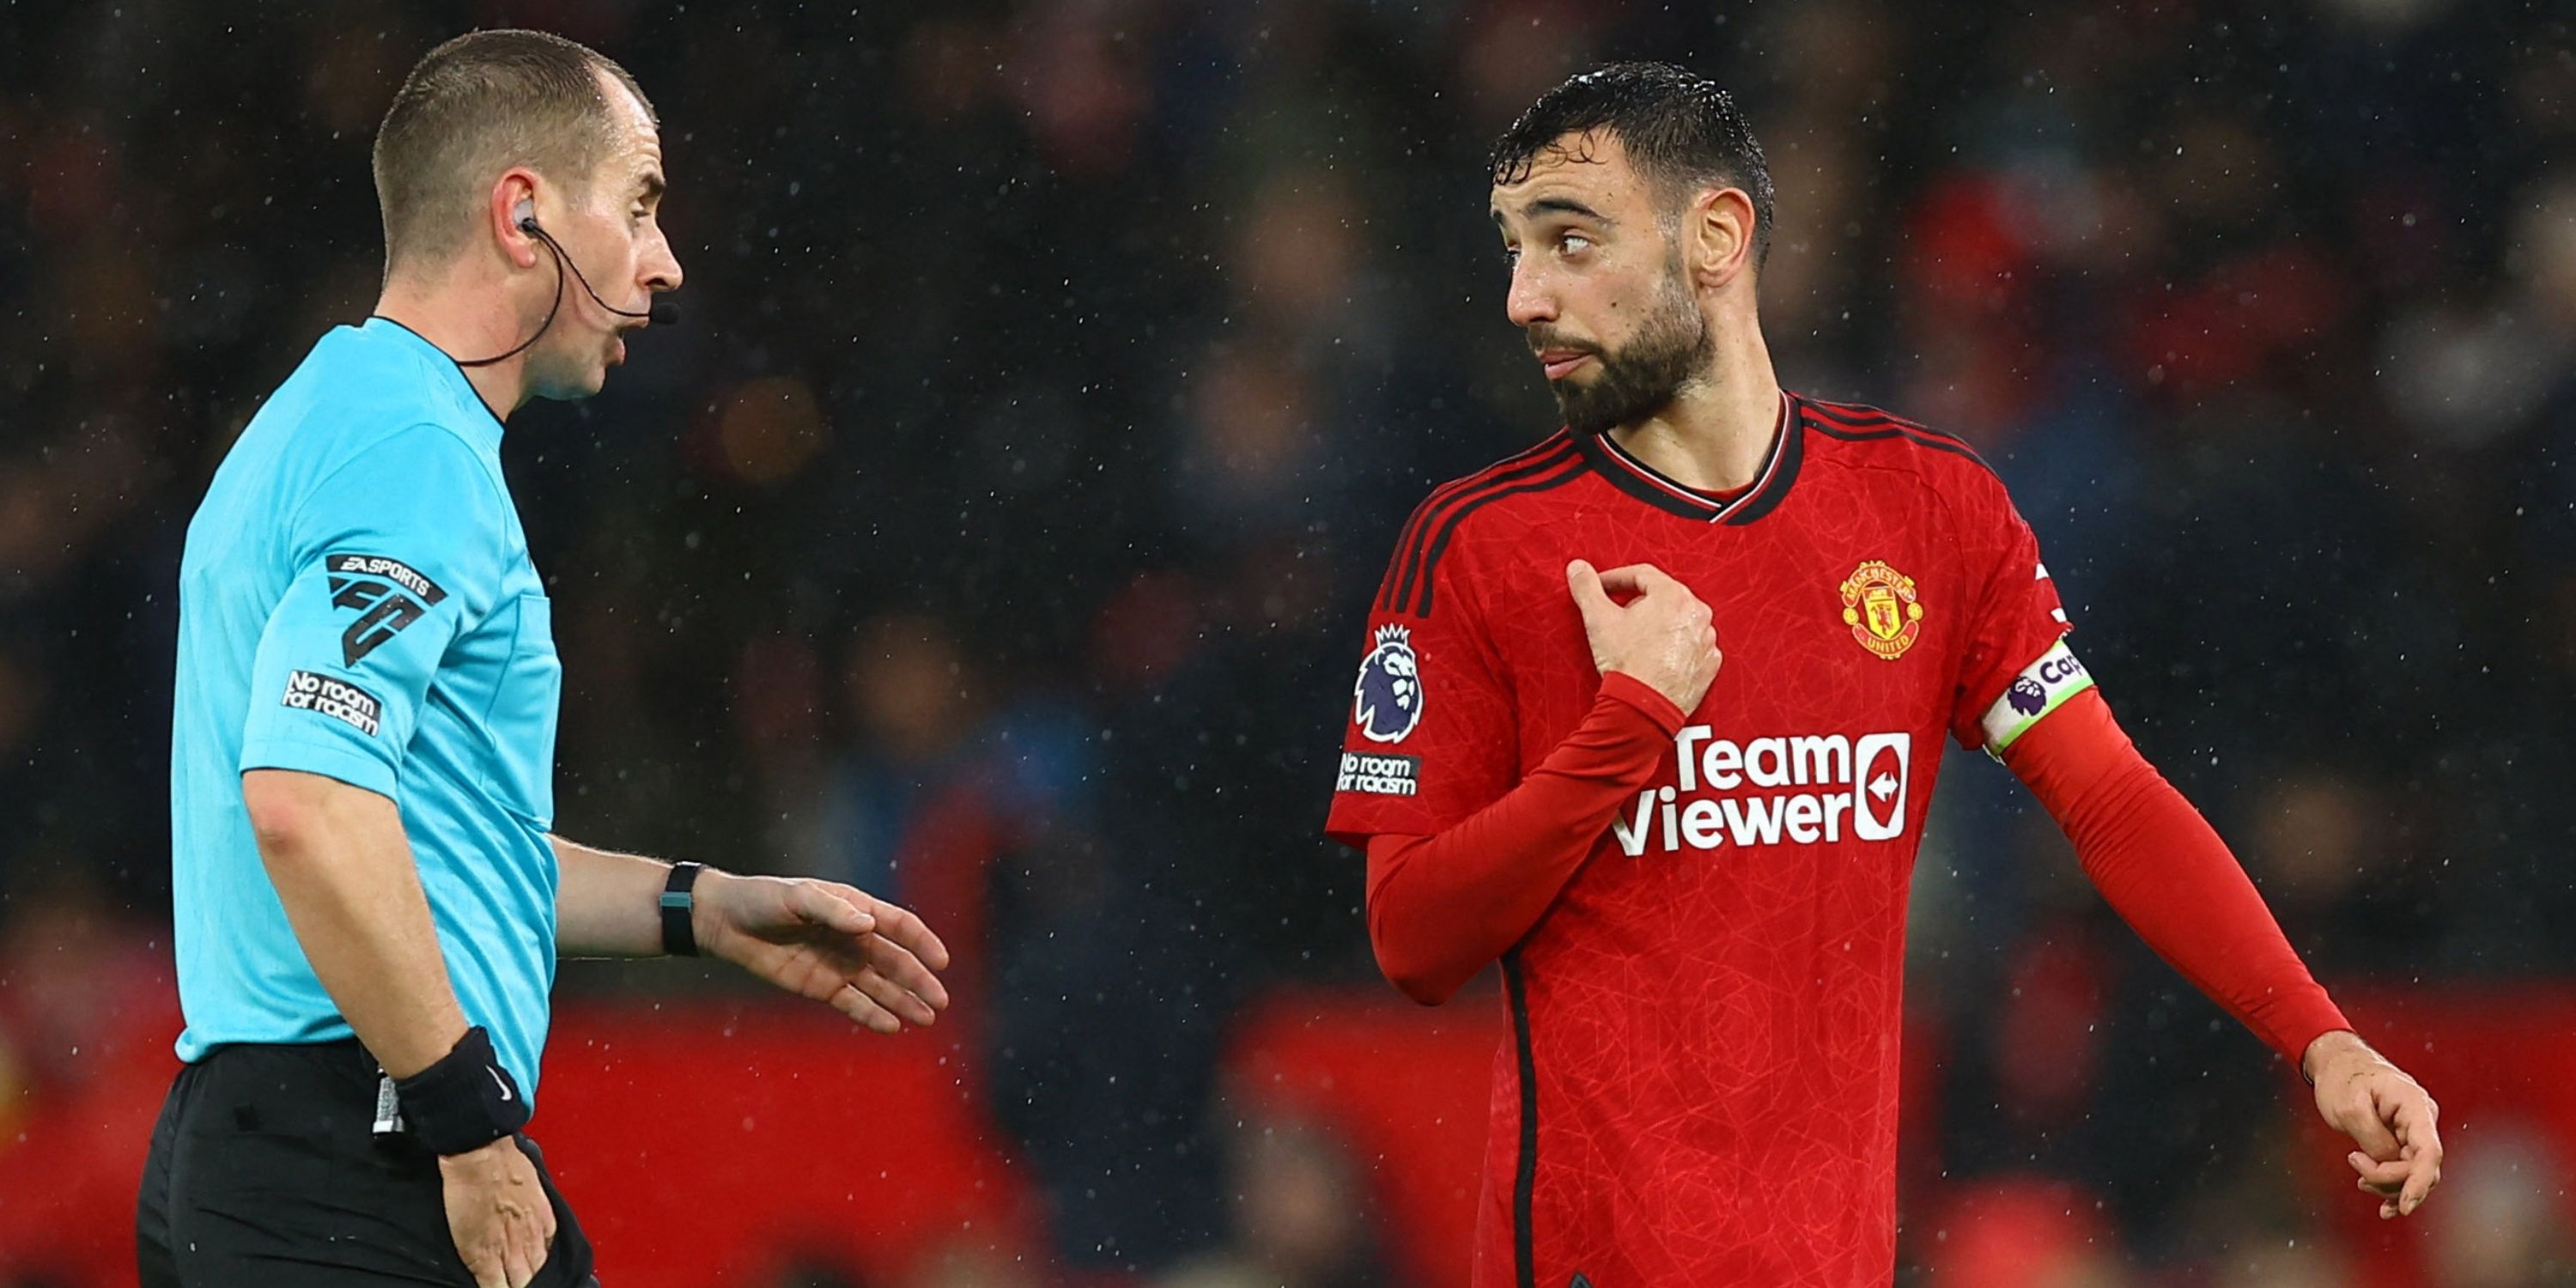 Bruno Fernandes of Manchester United talks with referee Peter Bankes